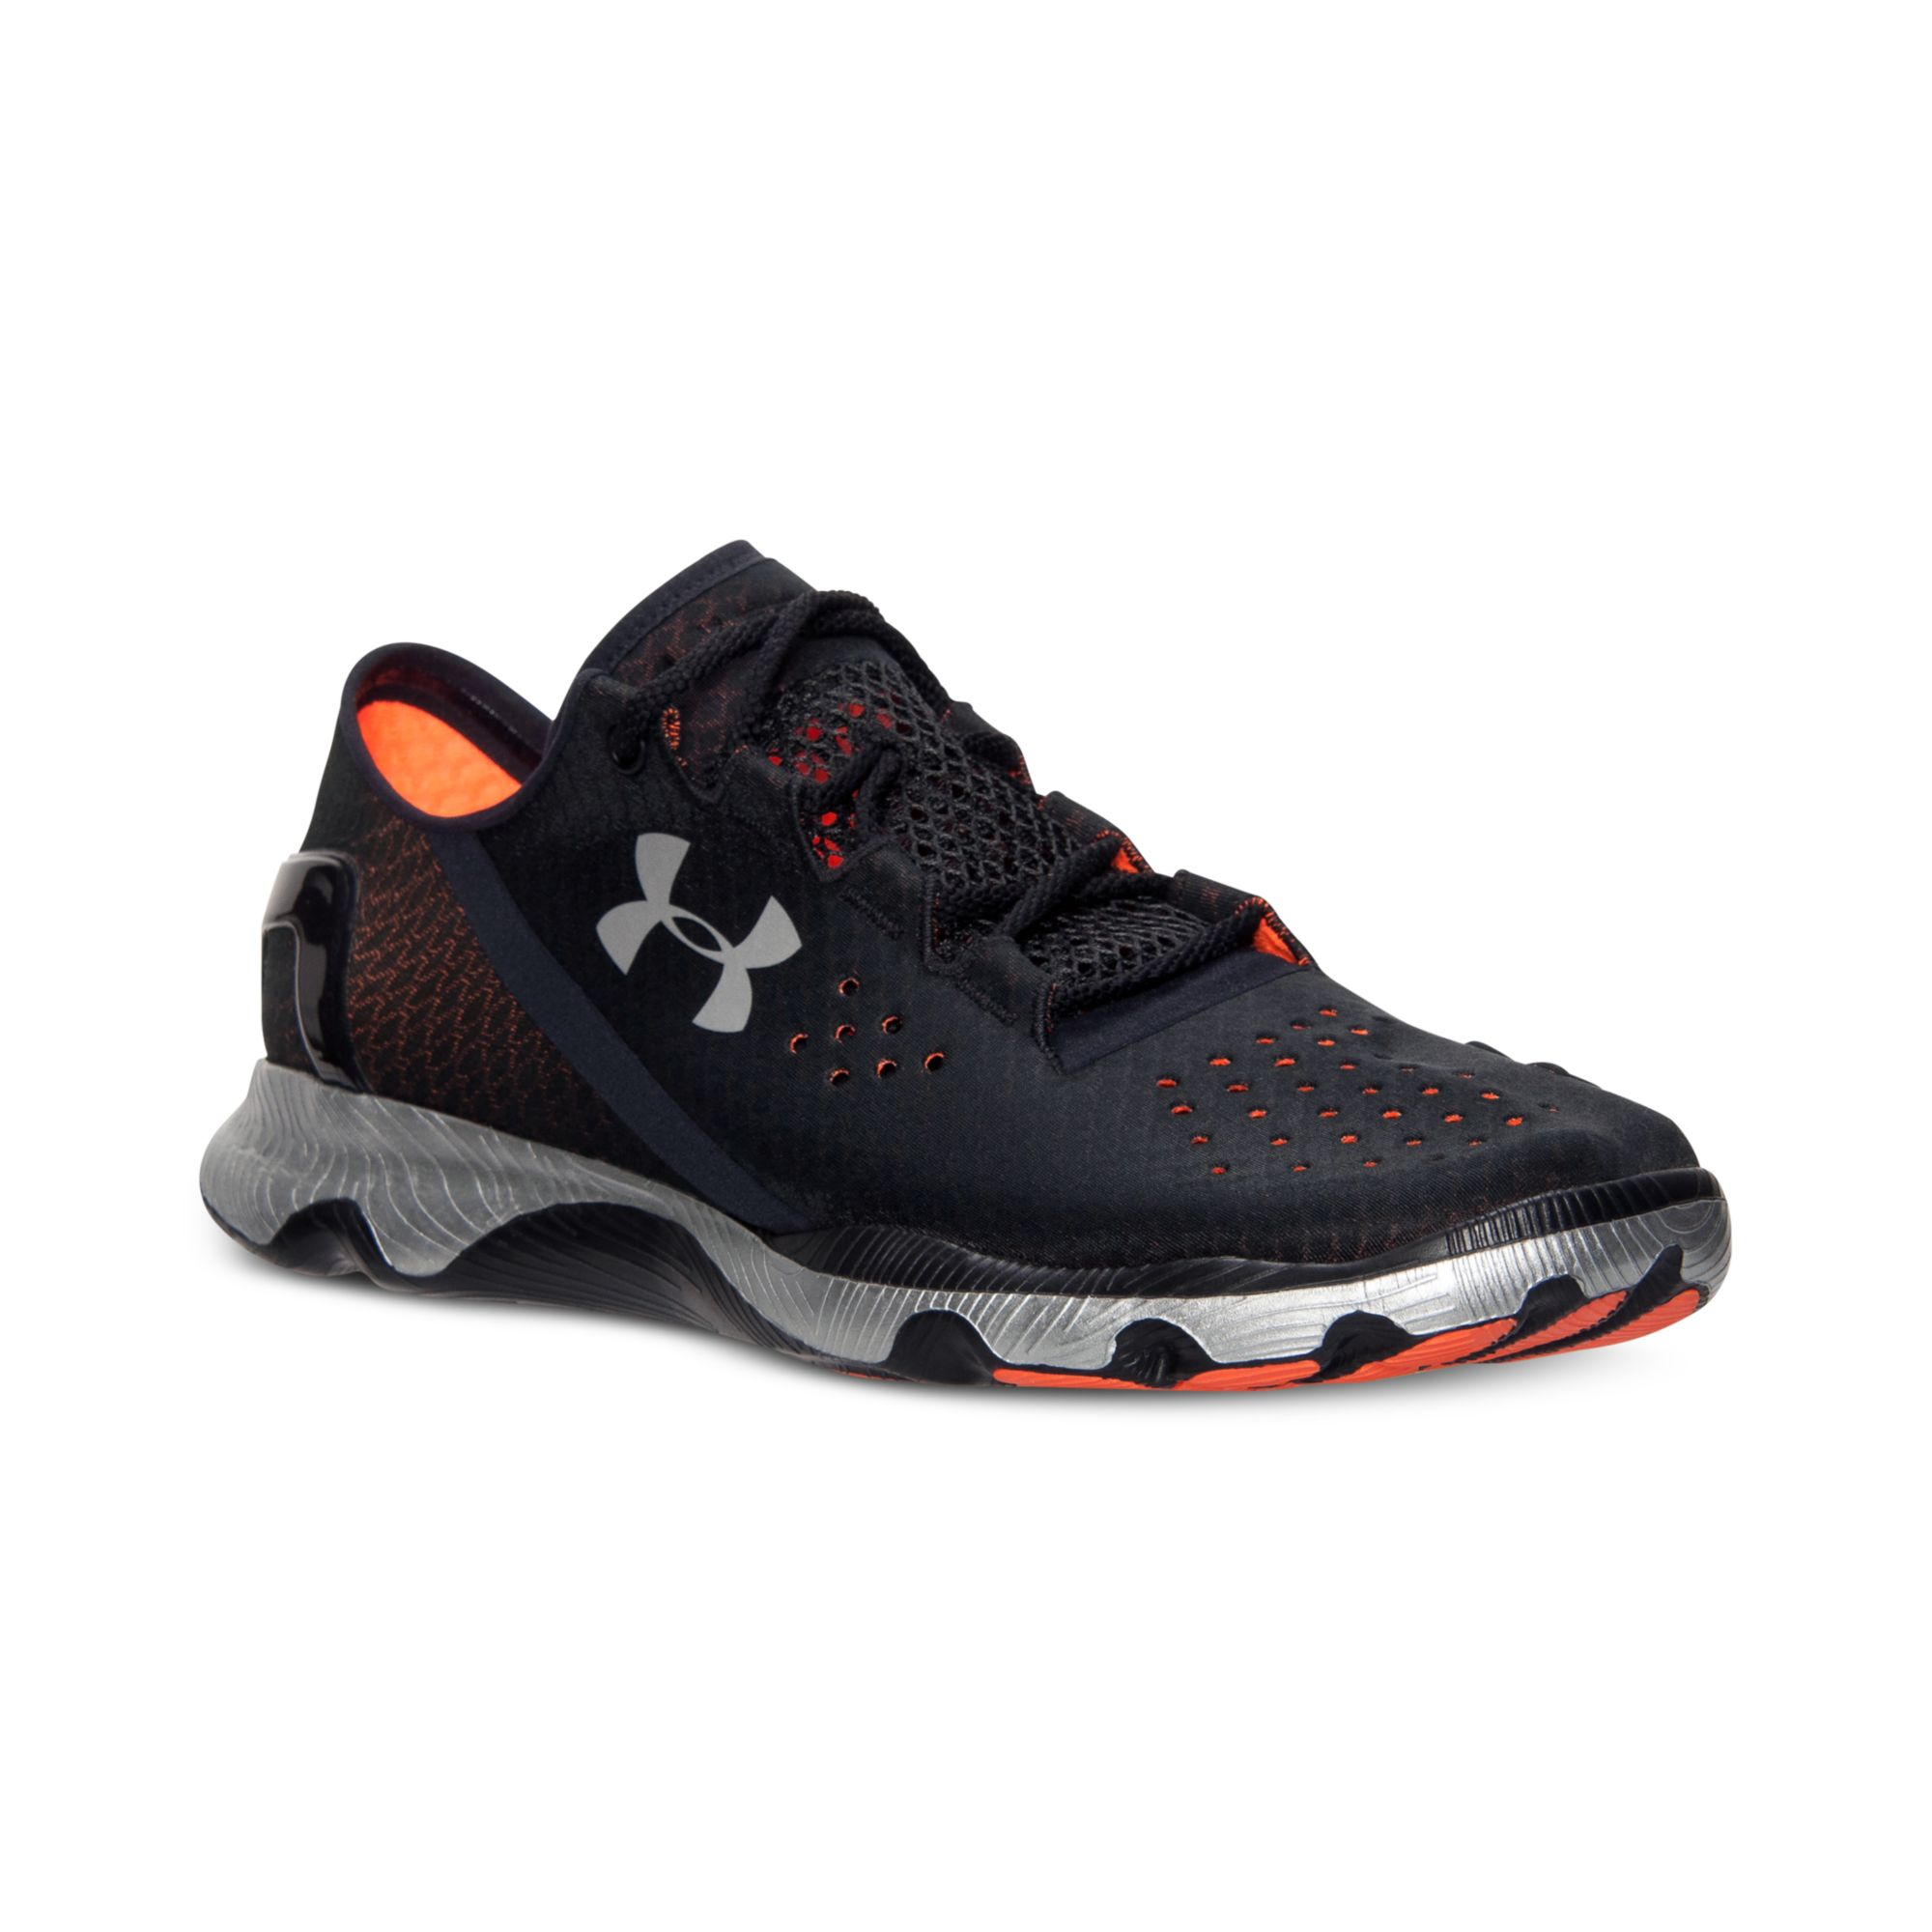 Under Armour Mens Speedform Running Sneakers From Finish Line in Black ...